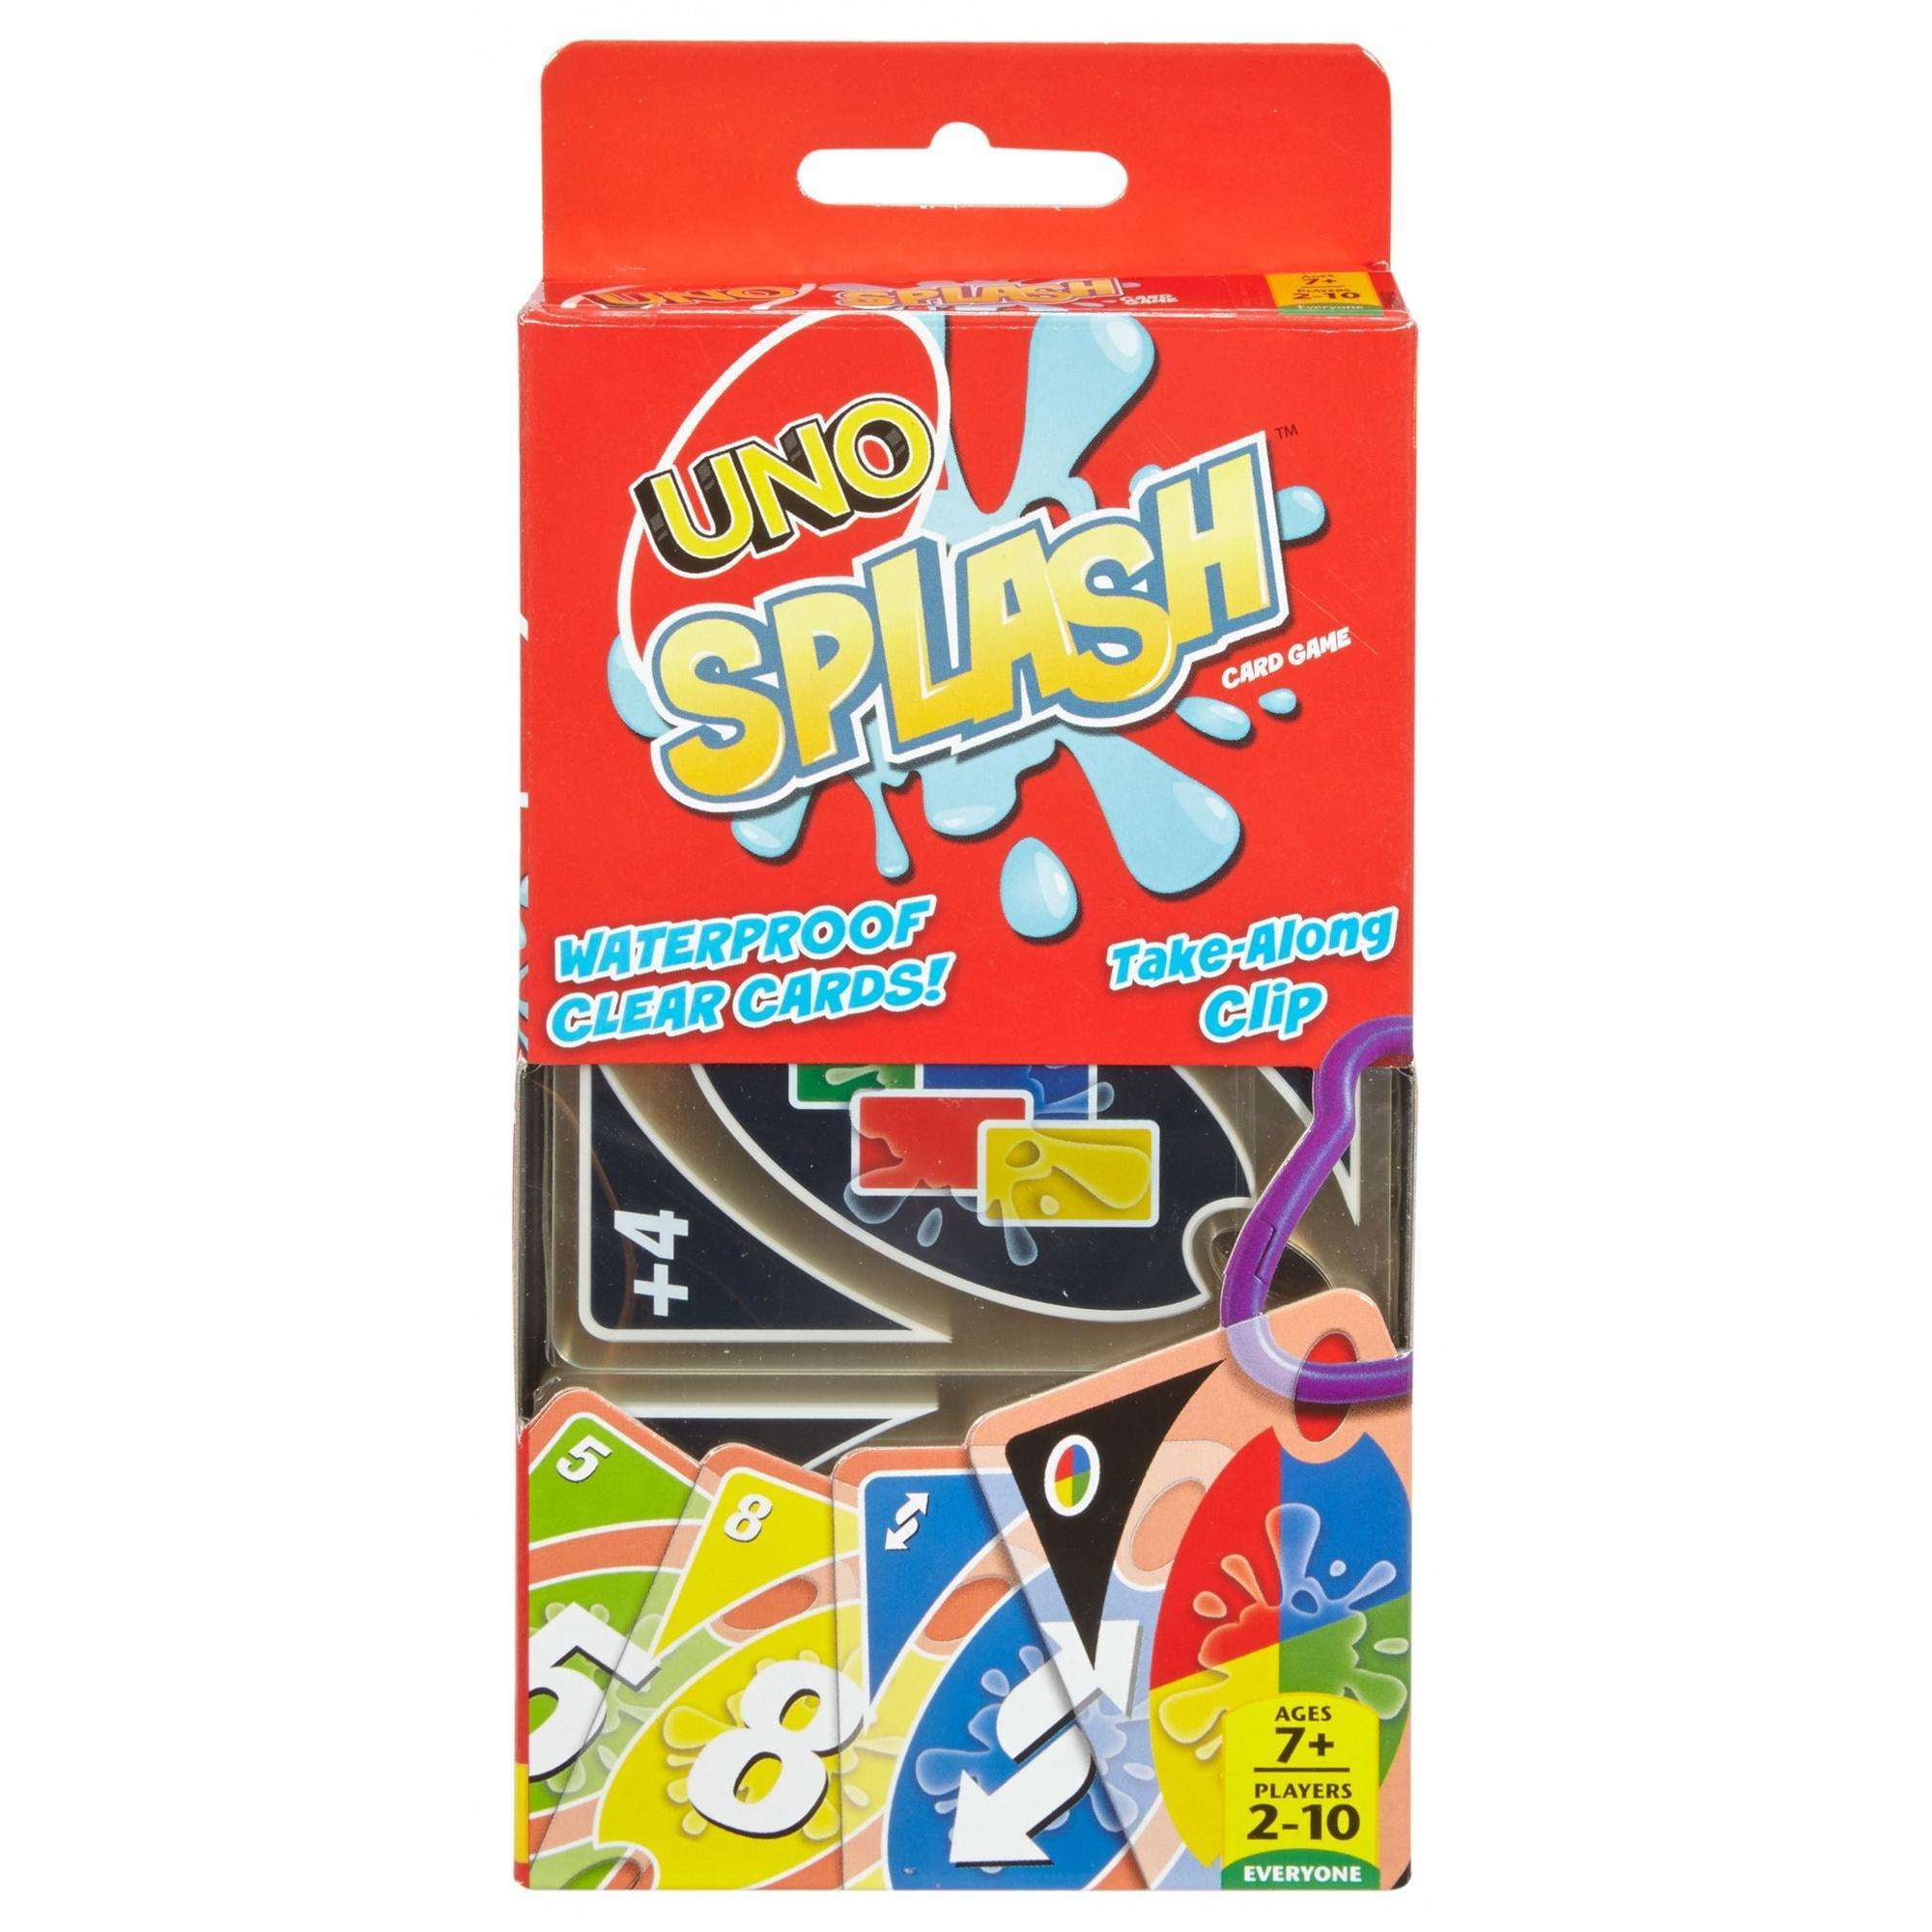 UNO Splash Card Game with Water-Resistant Plastic Cards & Clip